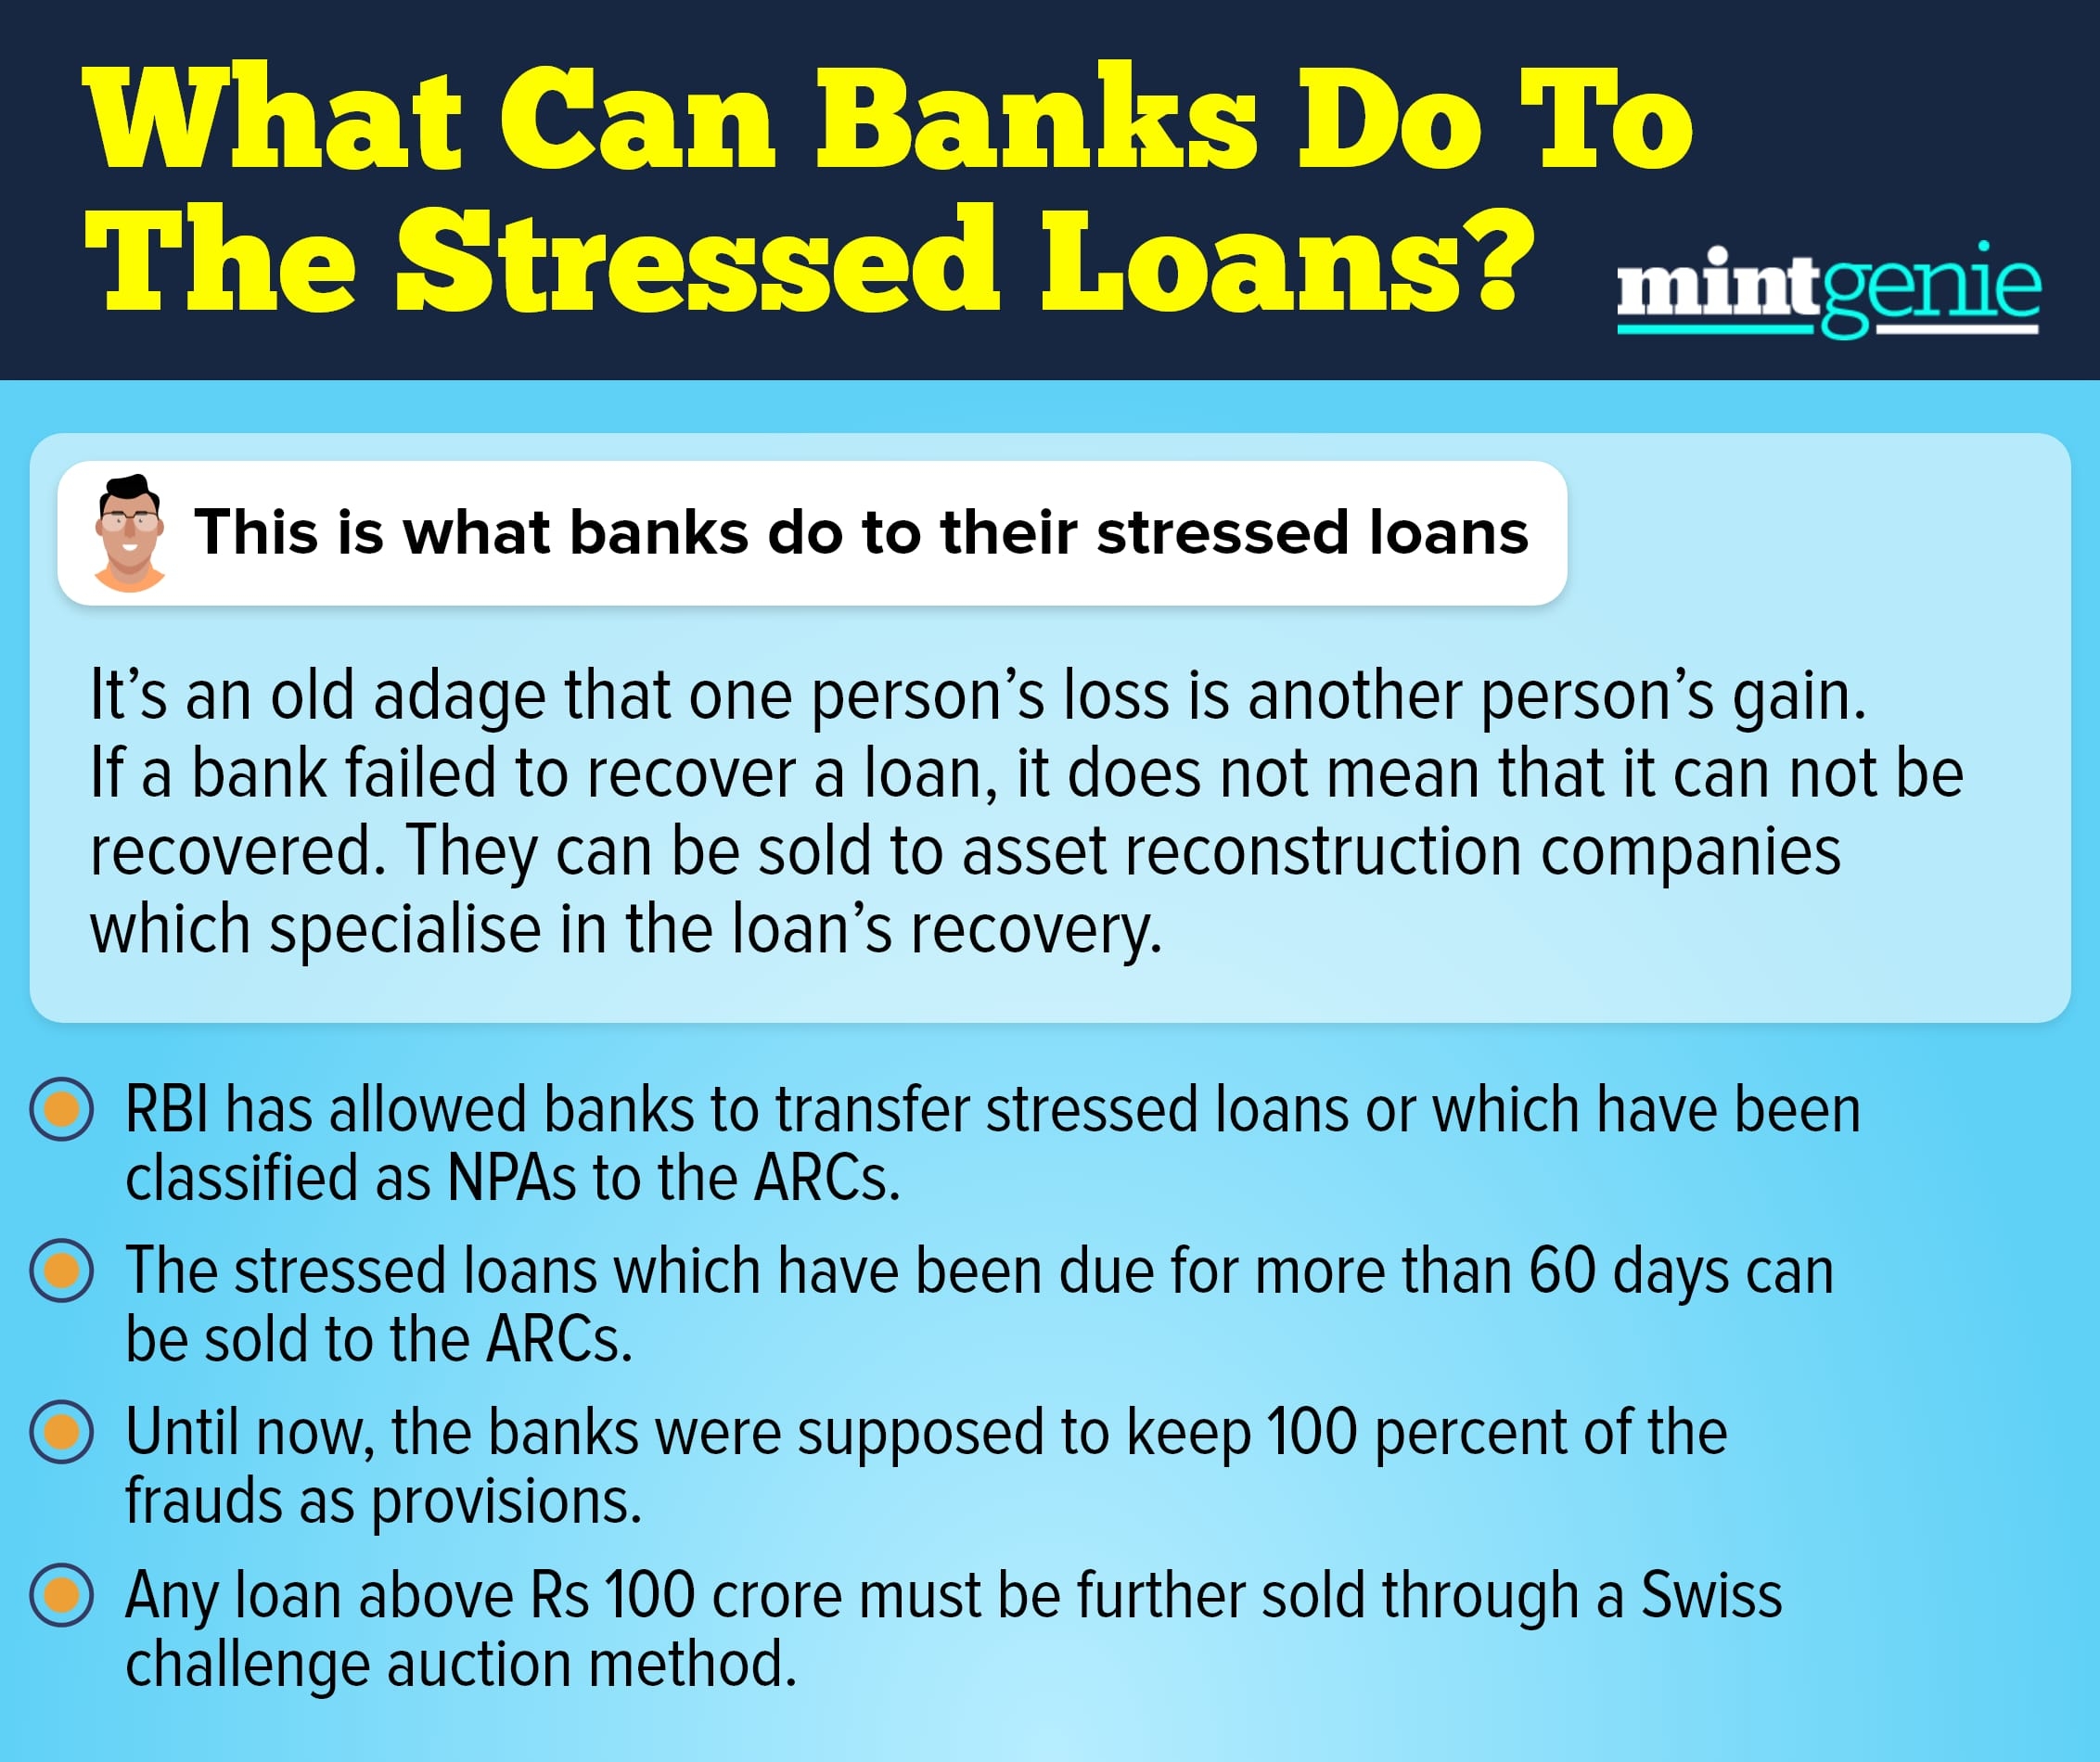 This is what banks can do to the stressed loans.&nbsp;